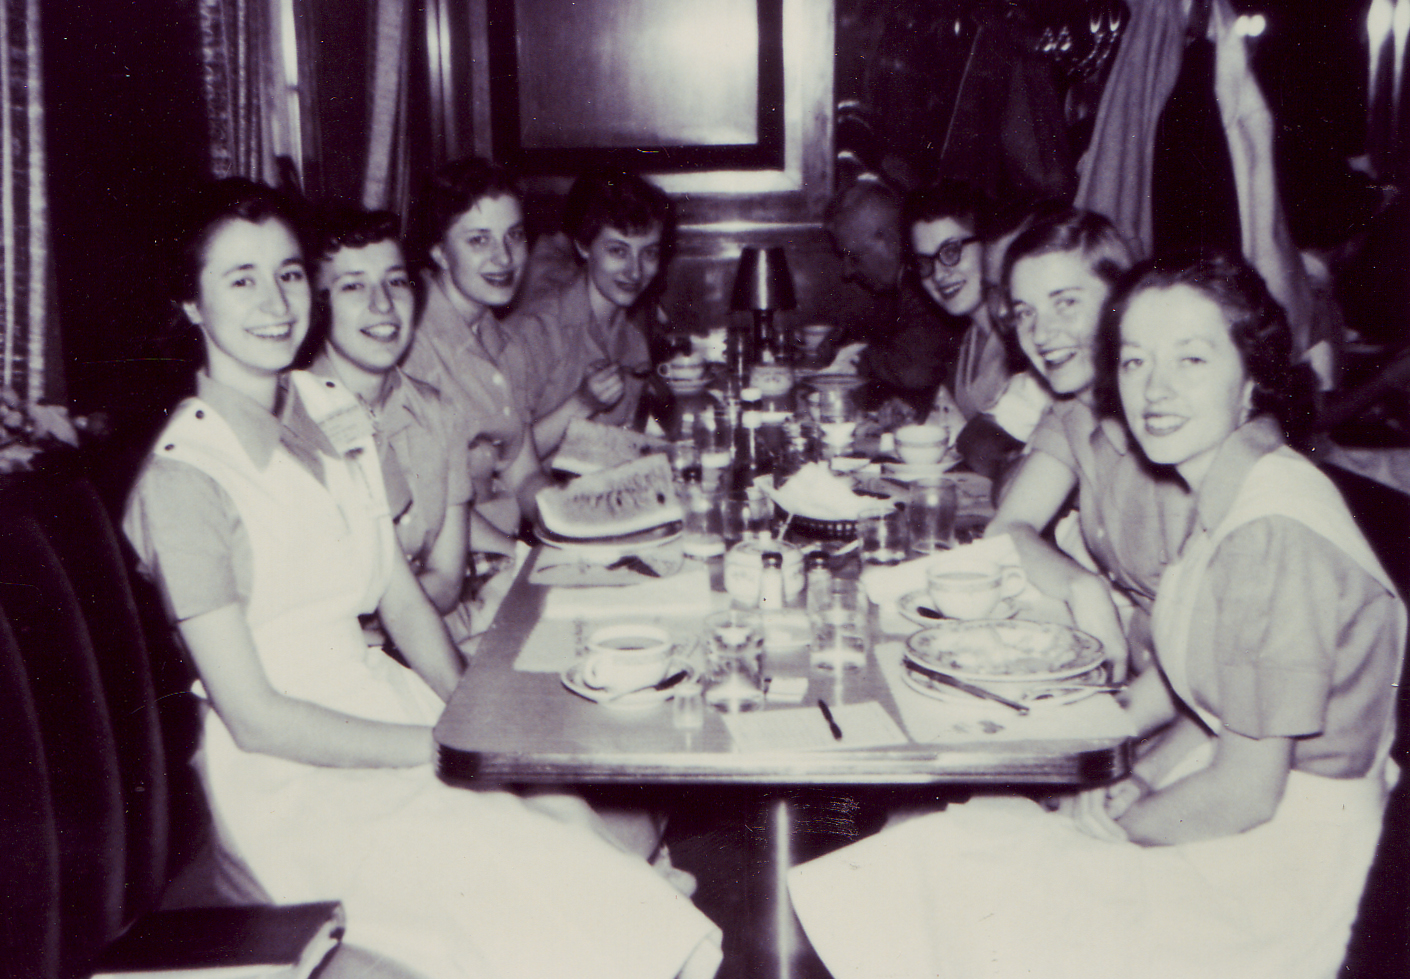 Nursing students dining in the 1950s